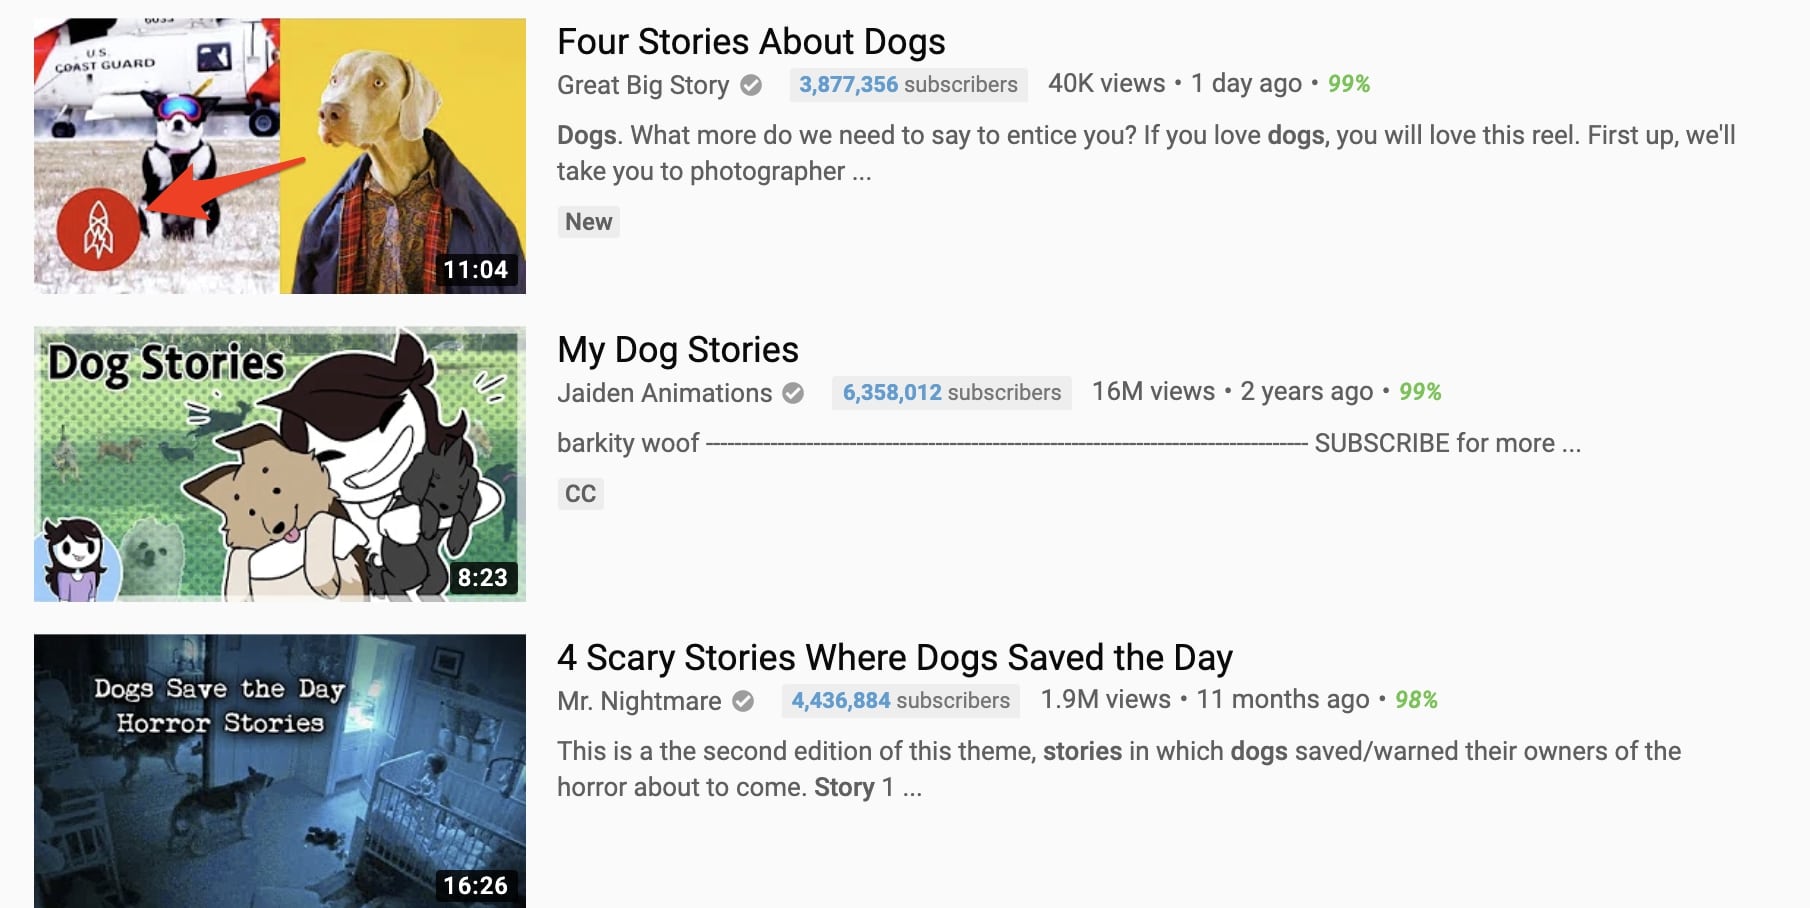 great big story using branded thumbnails on youtube